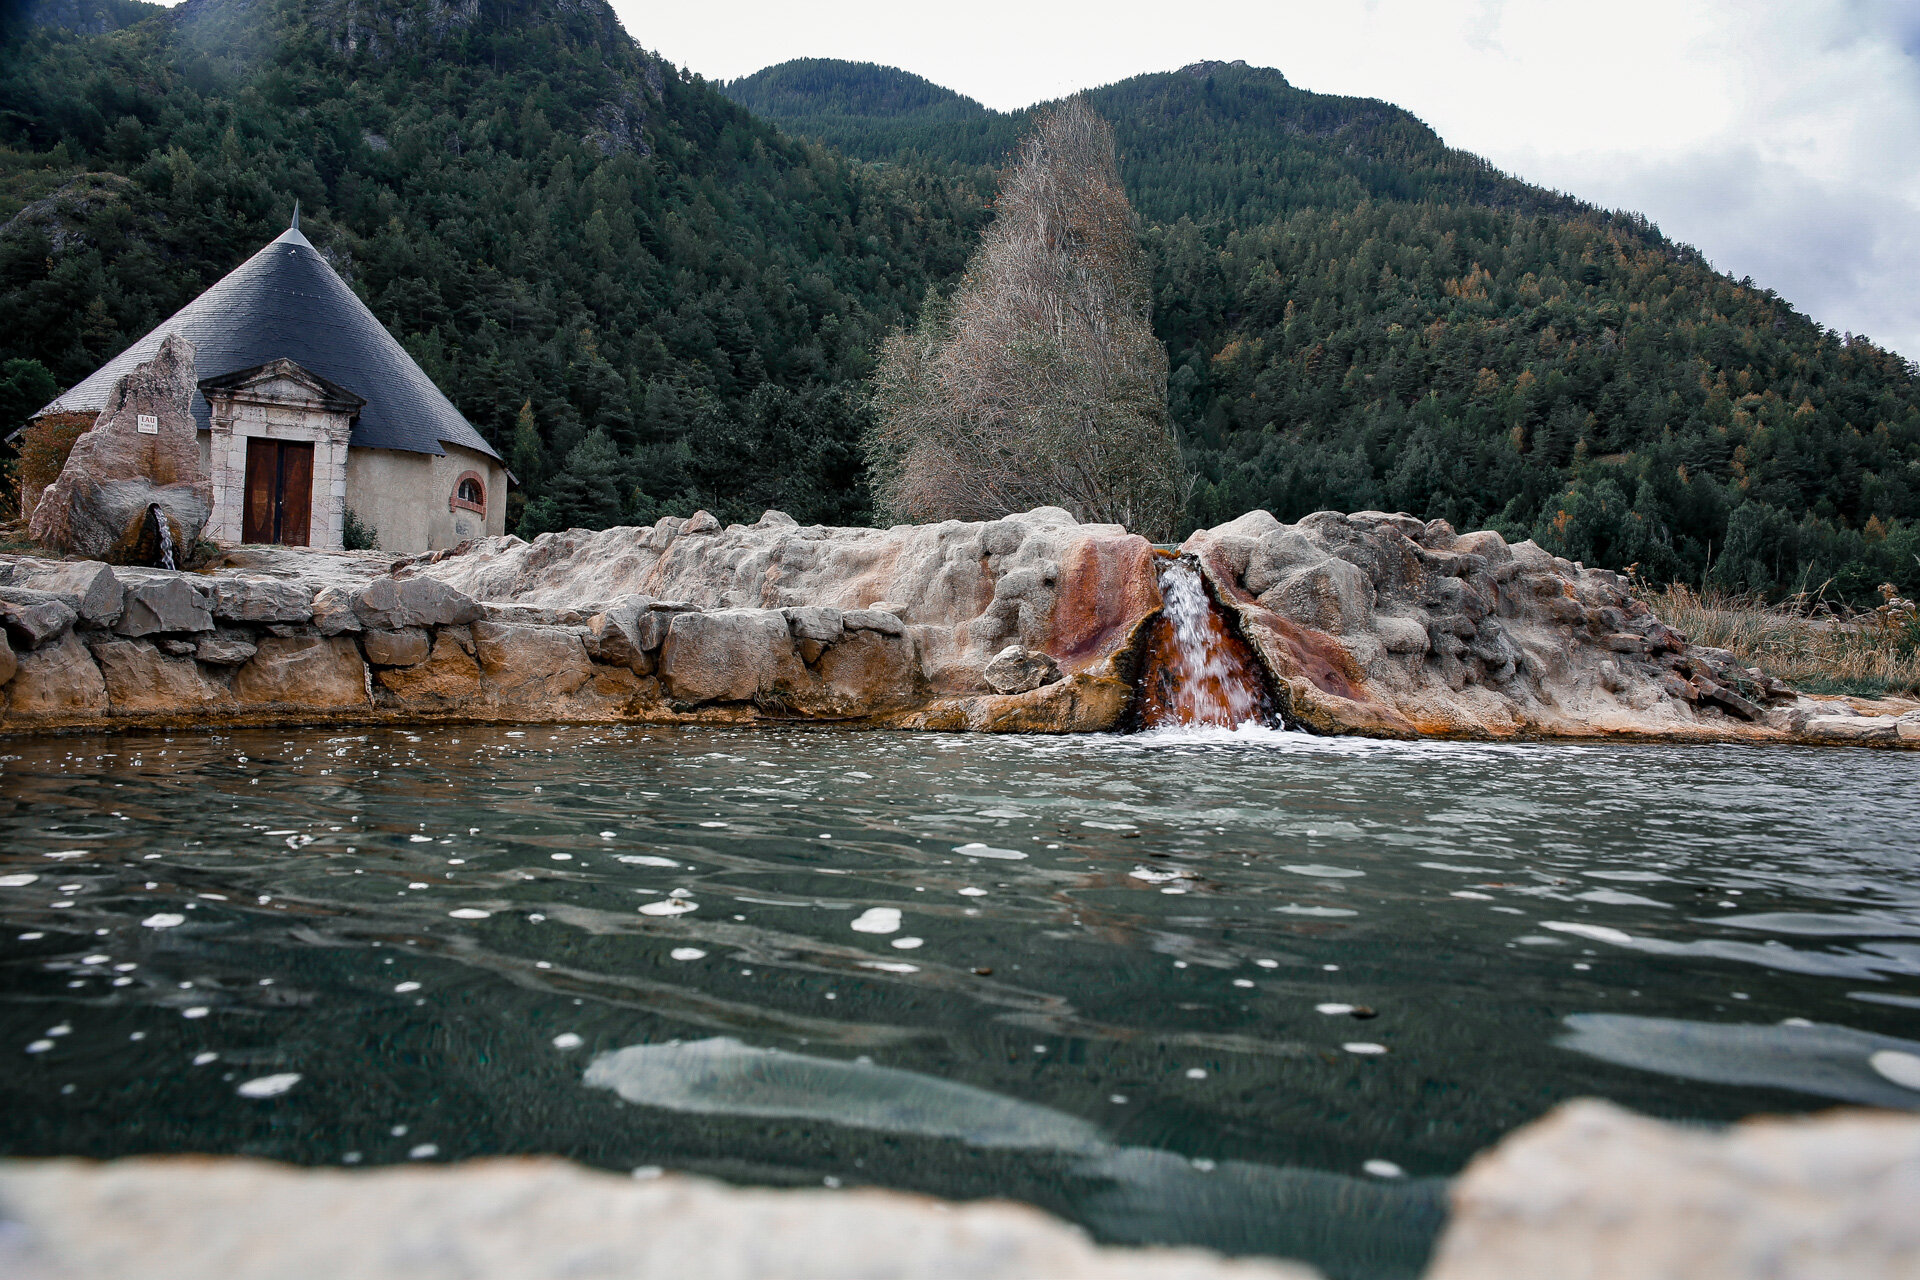 Europe's Best Free Natural Wild Hot Springs Thermal Baths - Le Plan De Phazy in Rasoul, Guillestre, Hautes-Alpes (High Alps), France